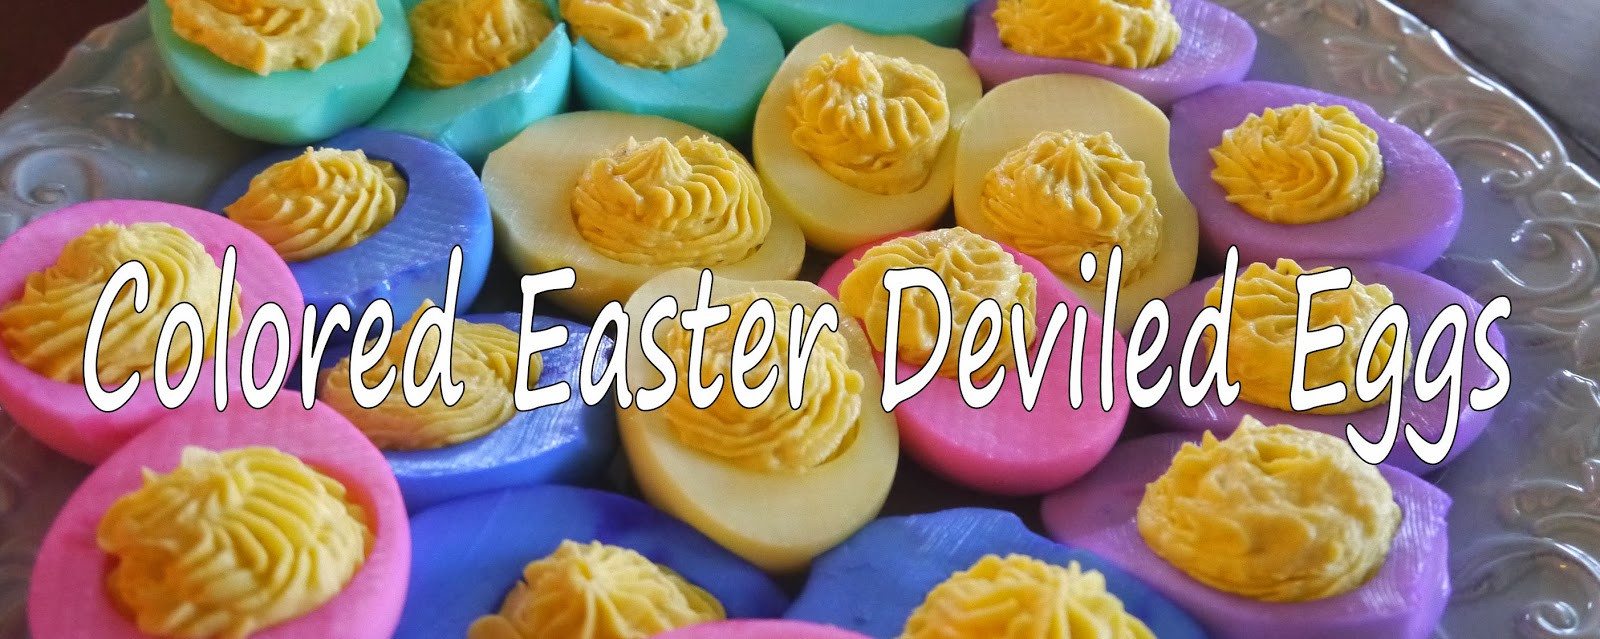 Colored Easter Deviled Eggs
 I Can Totally Do That Colored Easter Deviled Eggs